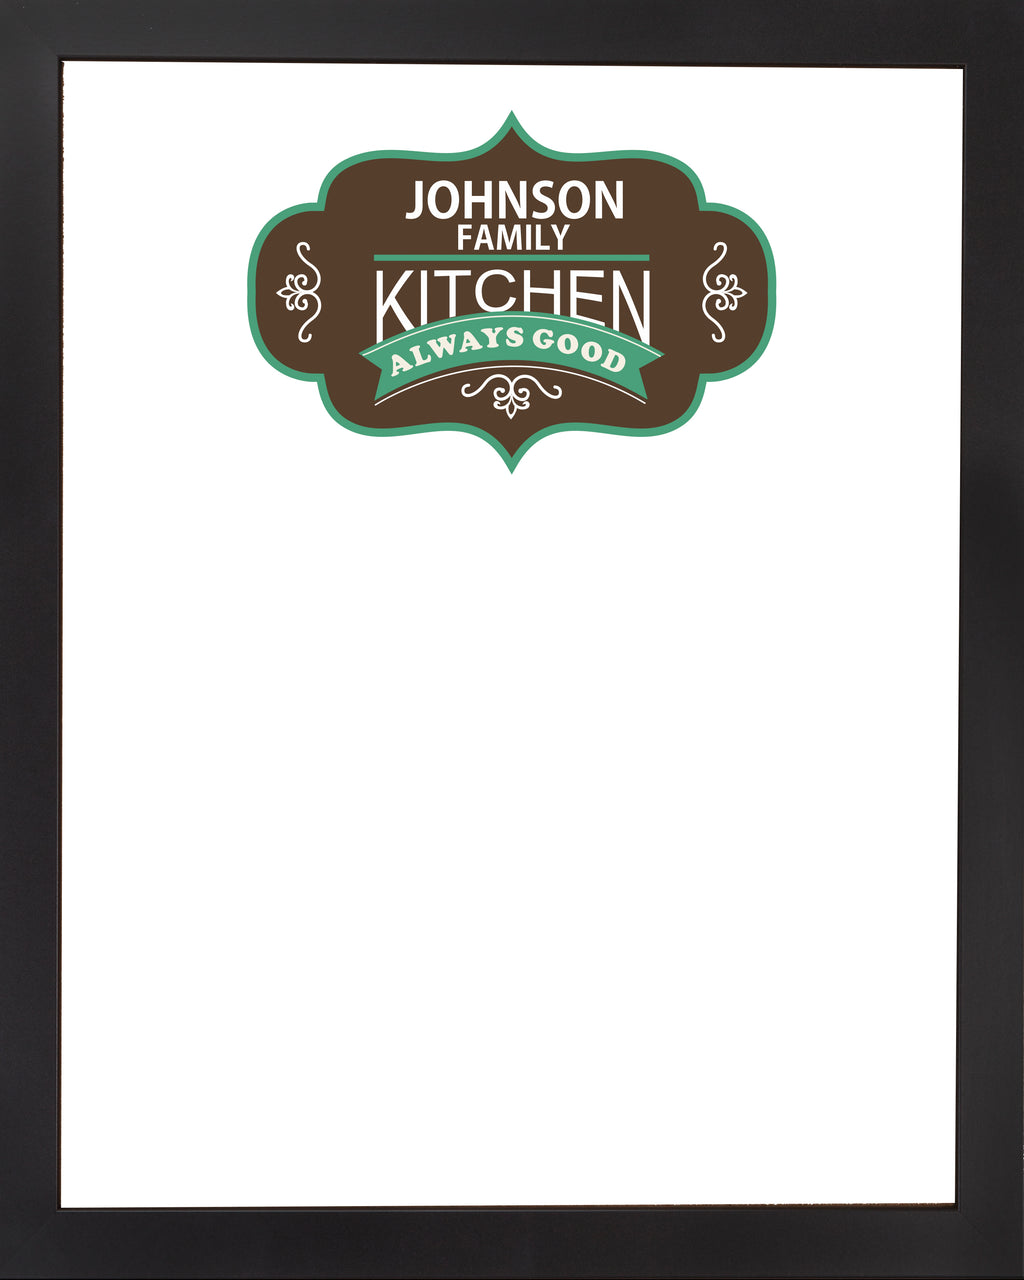 DRY ERASE BOARD 18 X 22: KITCHEN DINER LOGO (ADD YOUR NAME!)